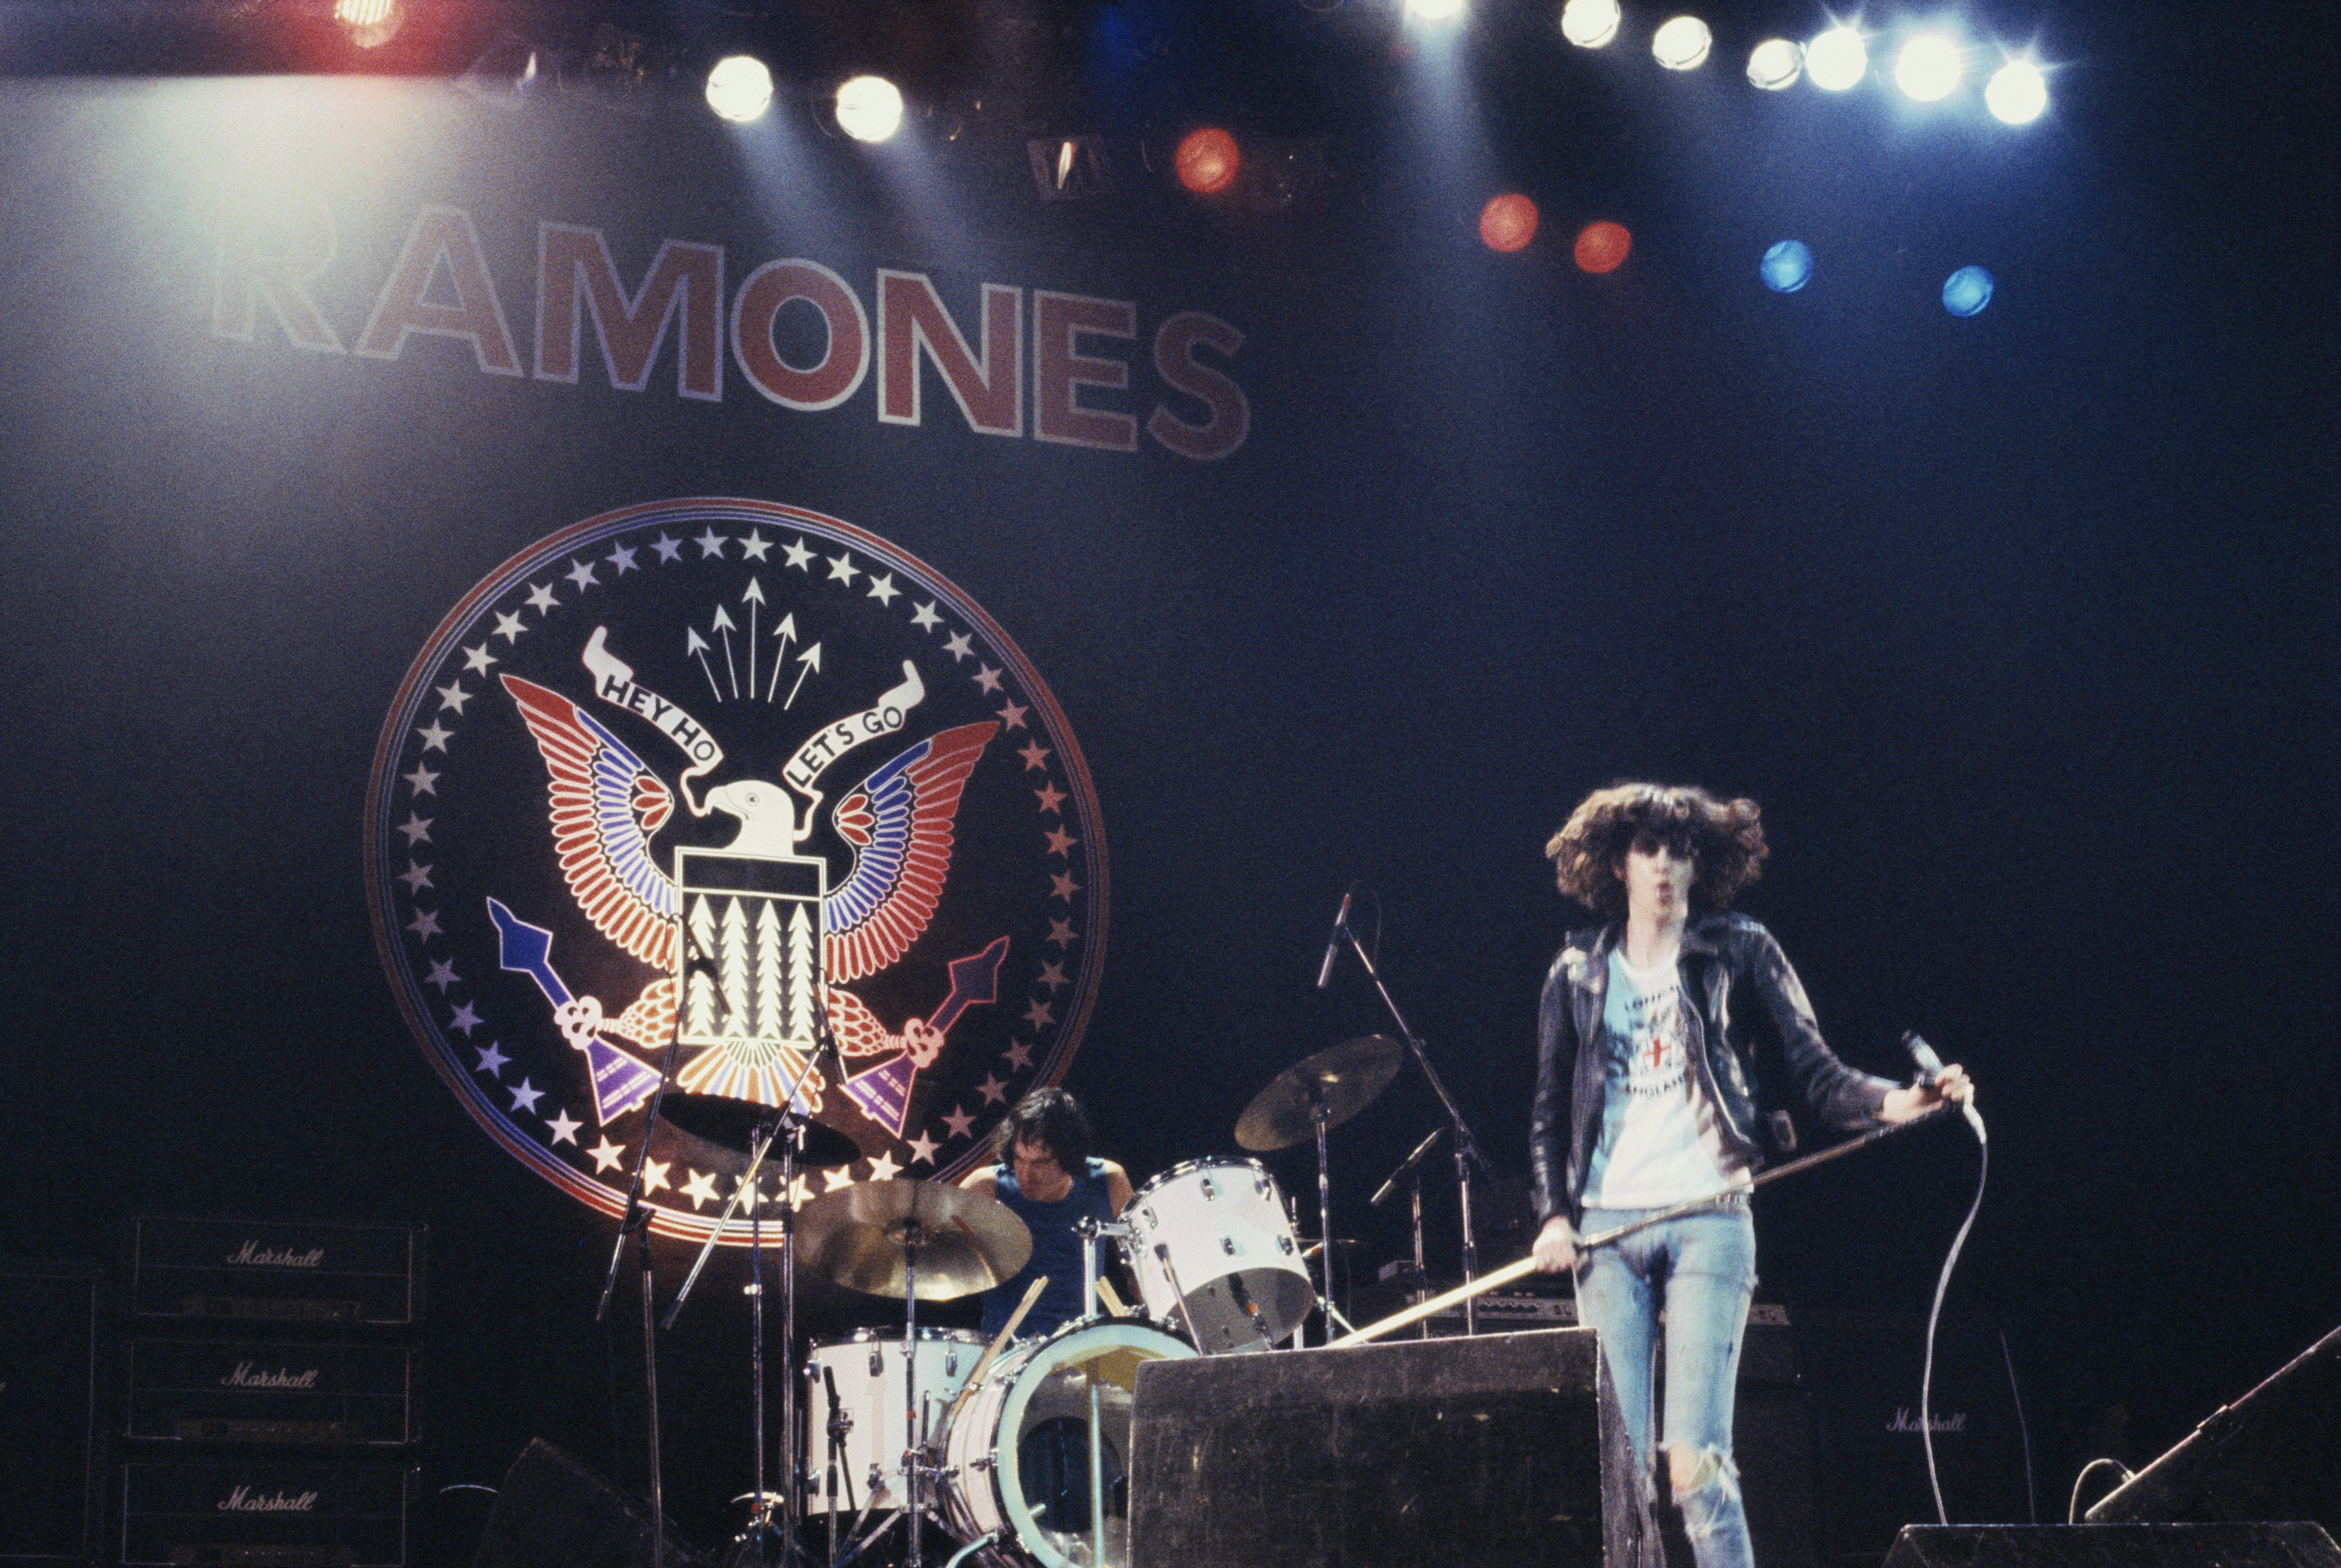 Joey Ramone's Record Collection Cretin Hops to the Auction Block